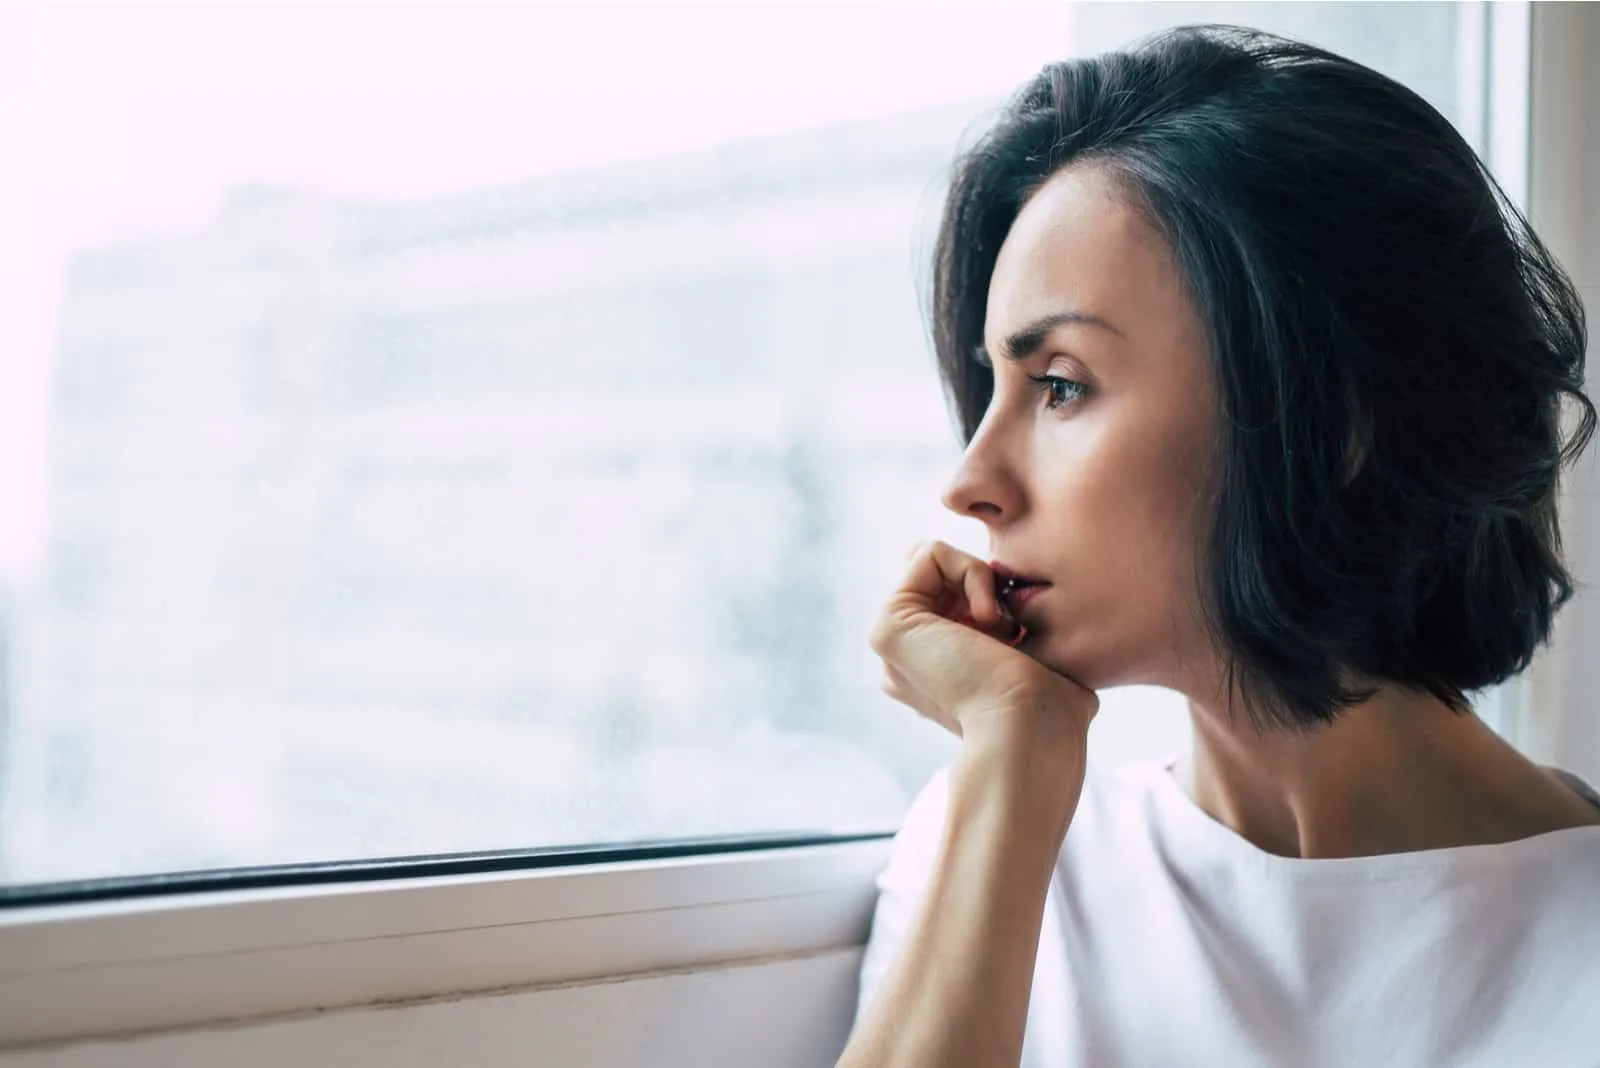 a depressed frightened woman looks out the window